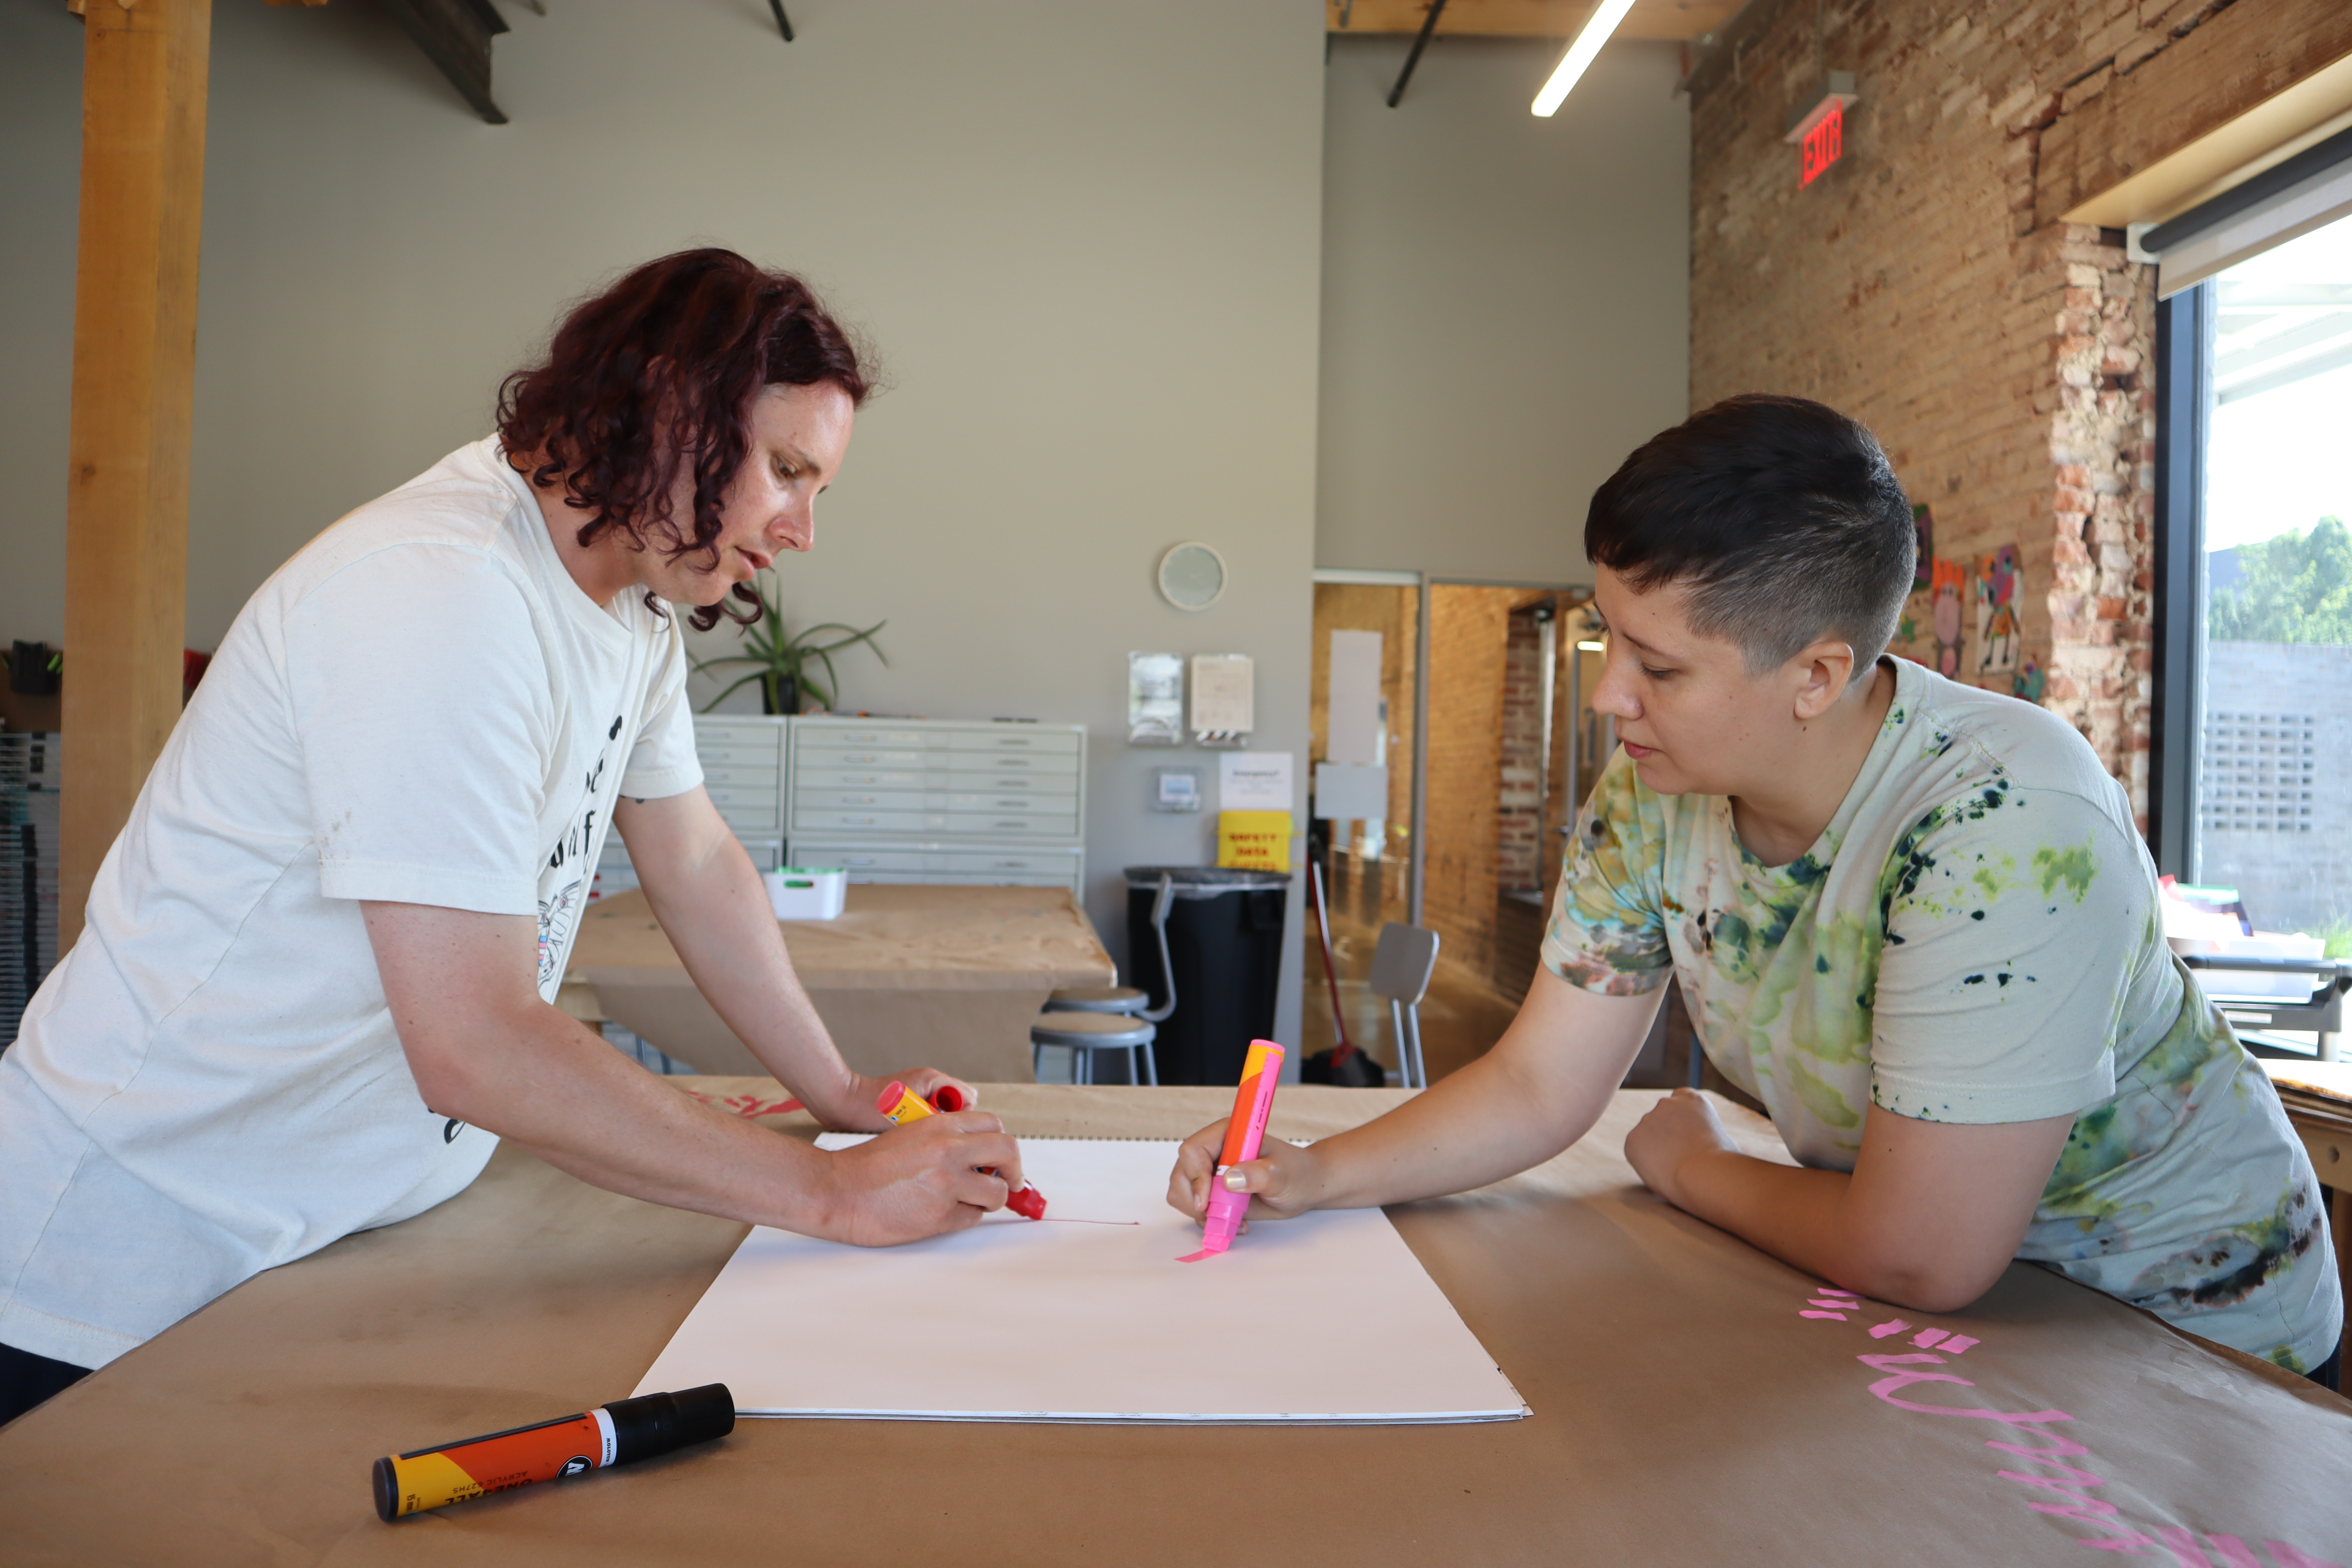 Two people stand on opposite sides of a large table covered in craft paper. They are leaning over, each holding a different colored marker, and are drawing on a large white piece of paper between them.